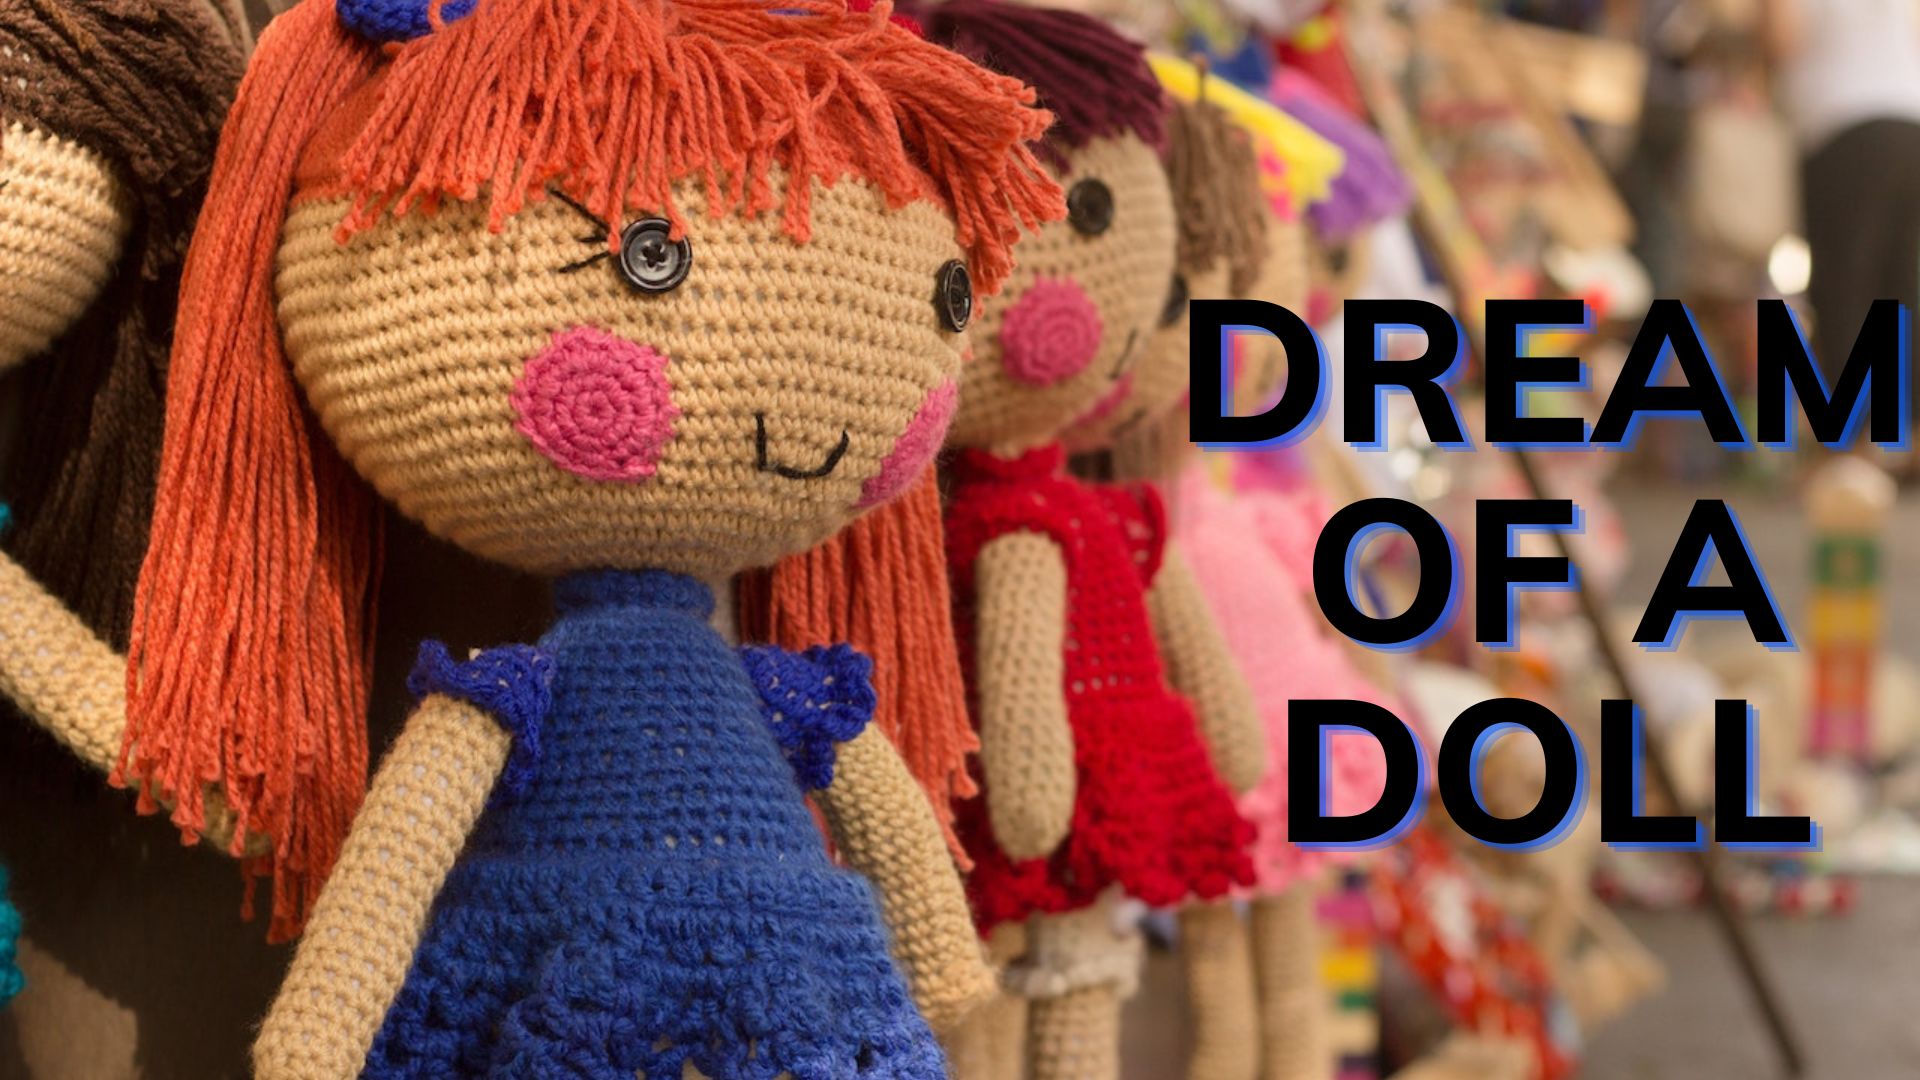 Dream Of A Doll - It Usually Represents Your Childhood